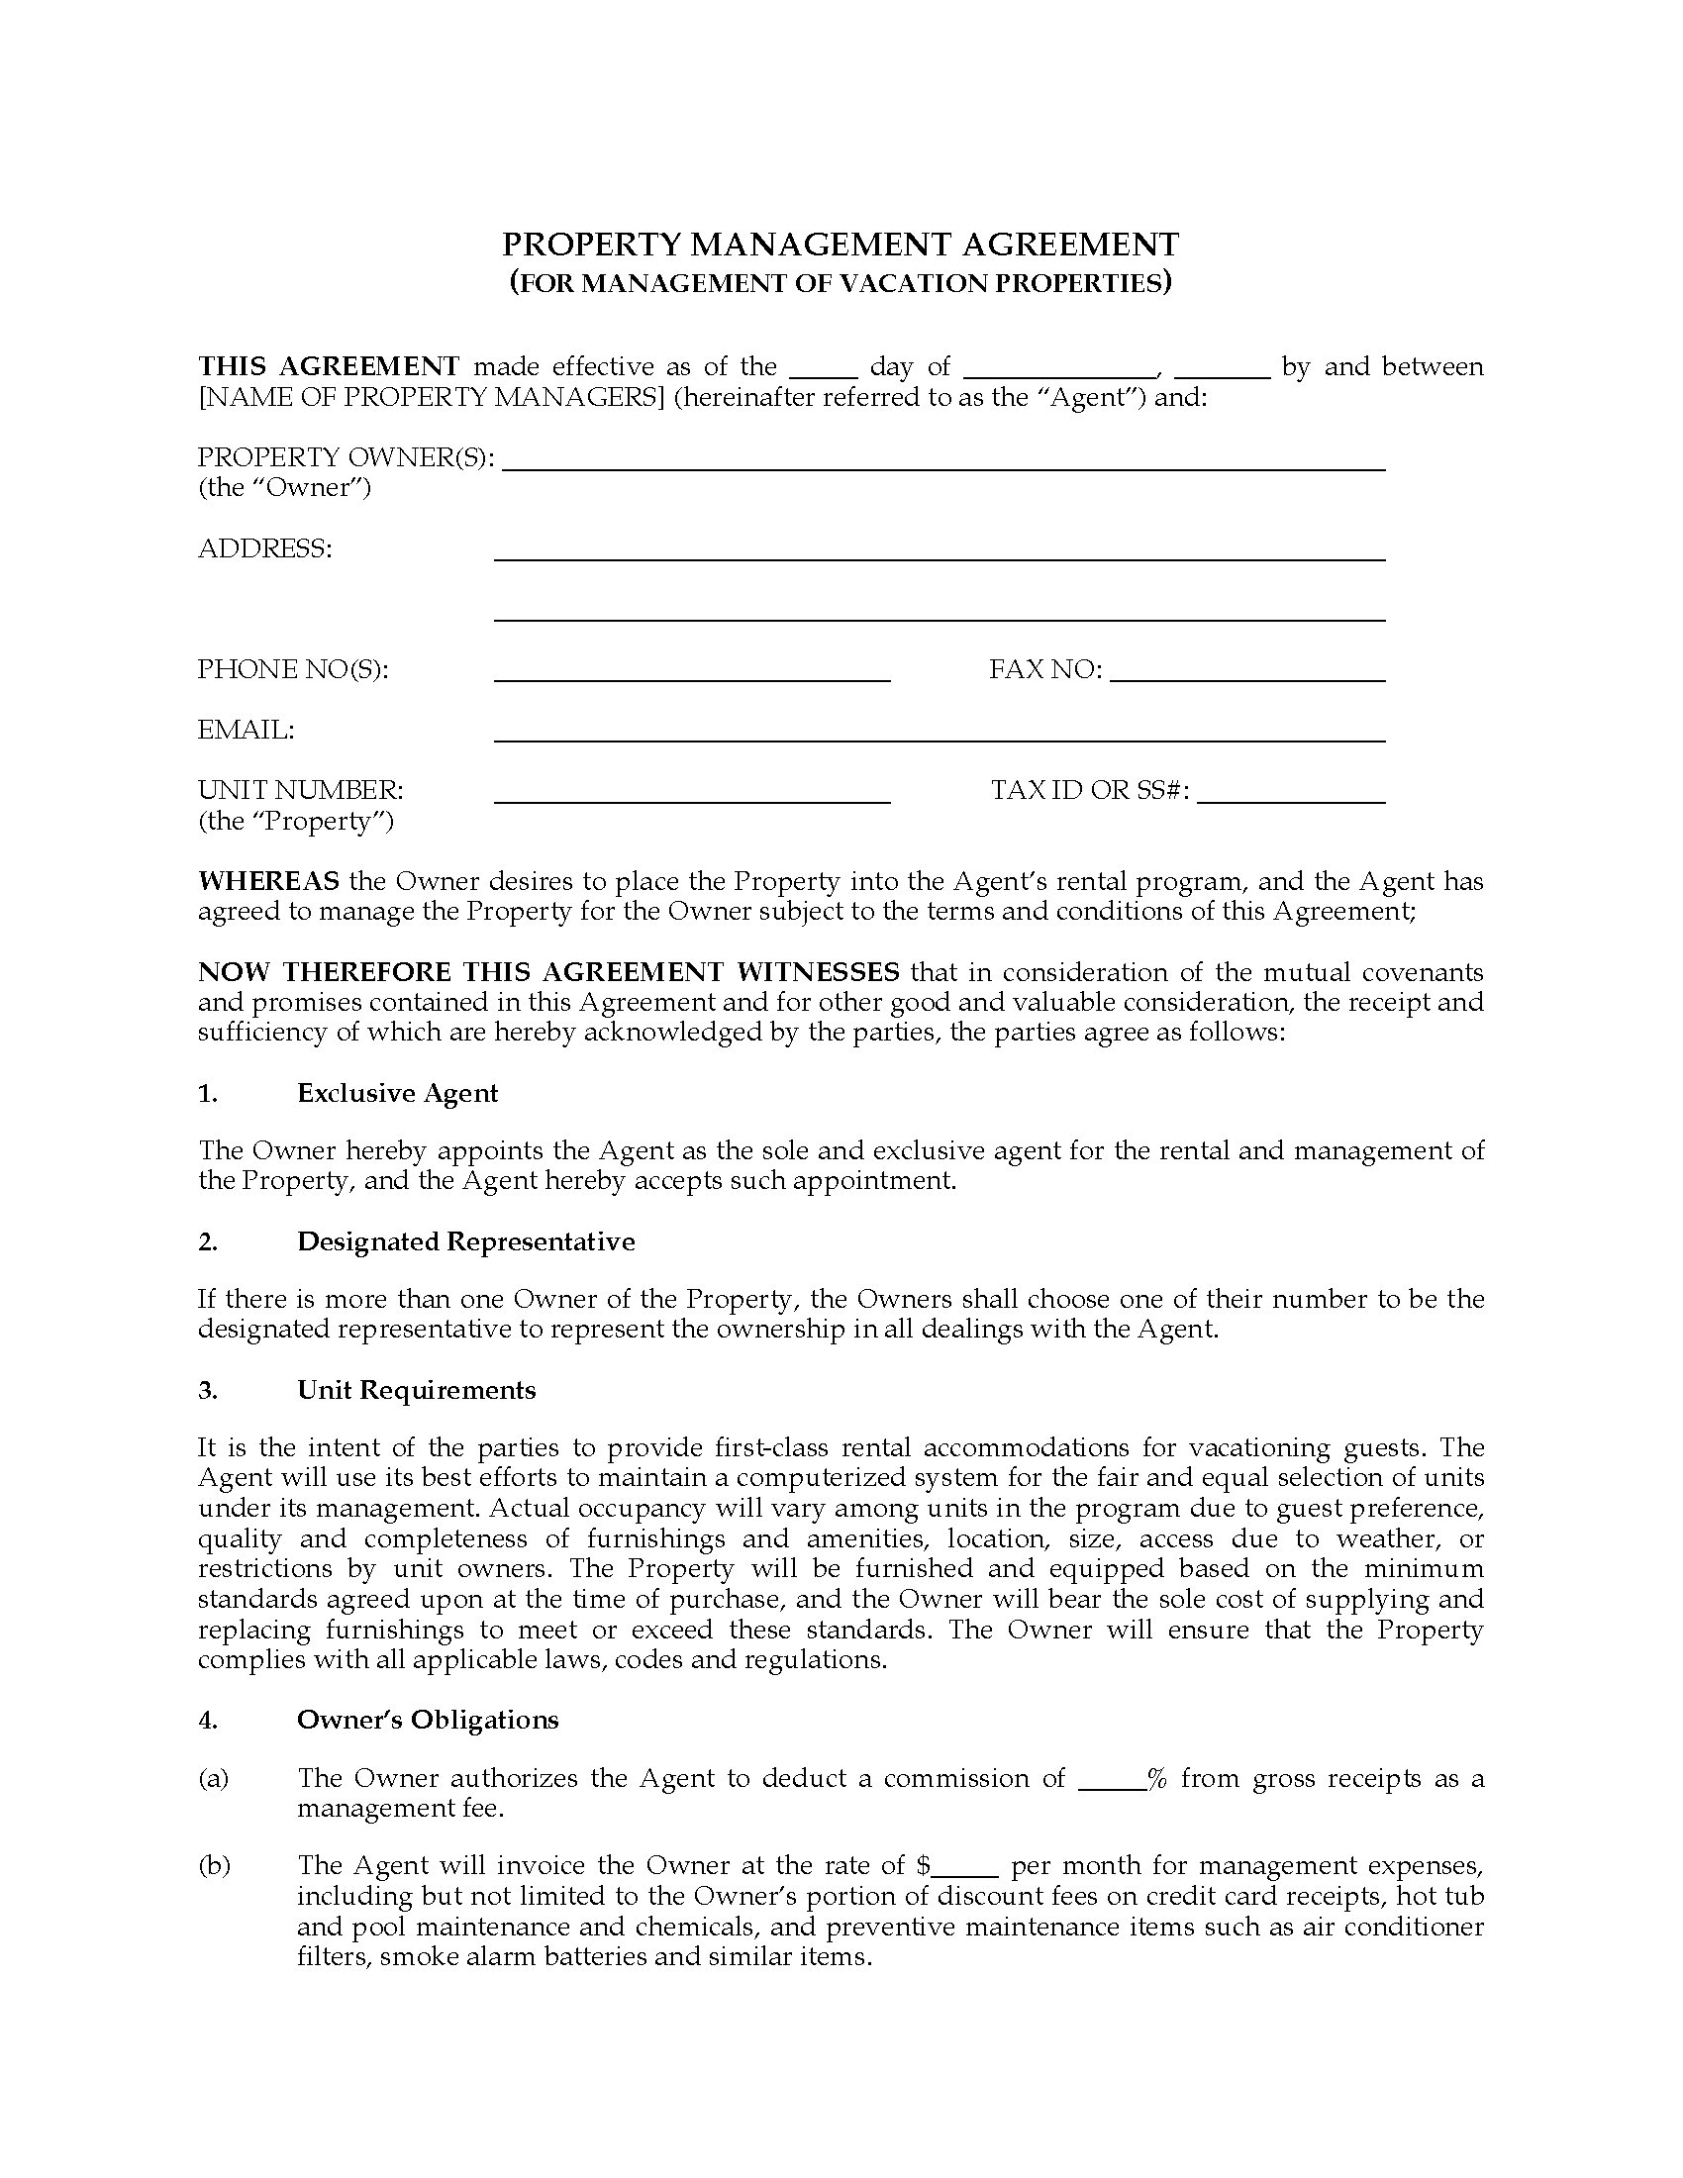 Property Management Agreement For Vacation Properties | Legal Forms And Throughout Land Promotion Agreement Template